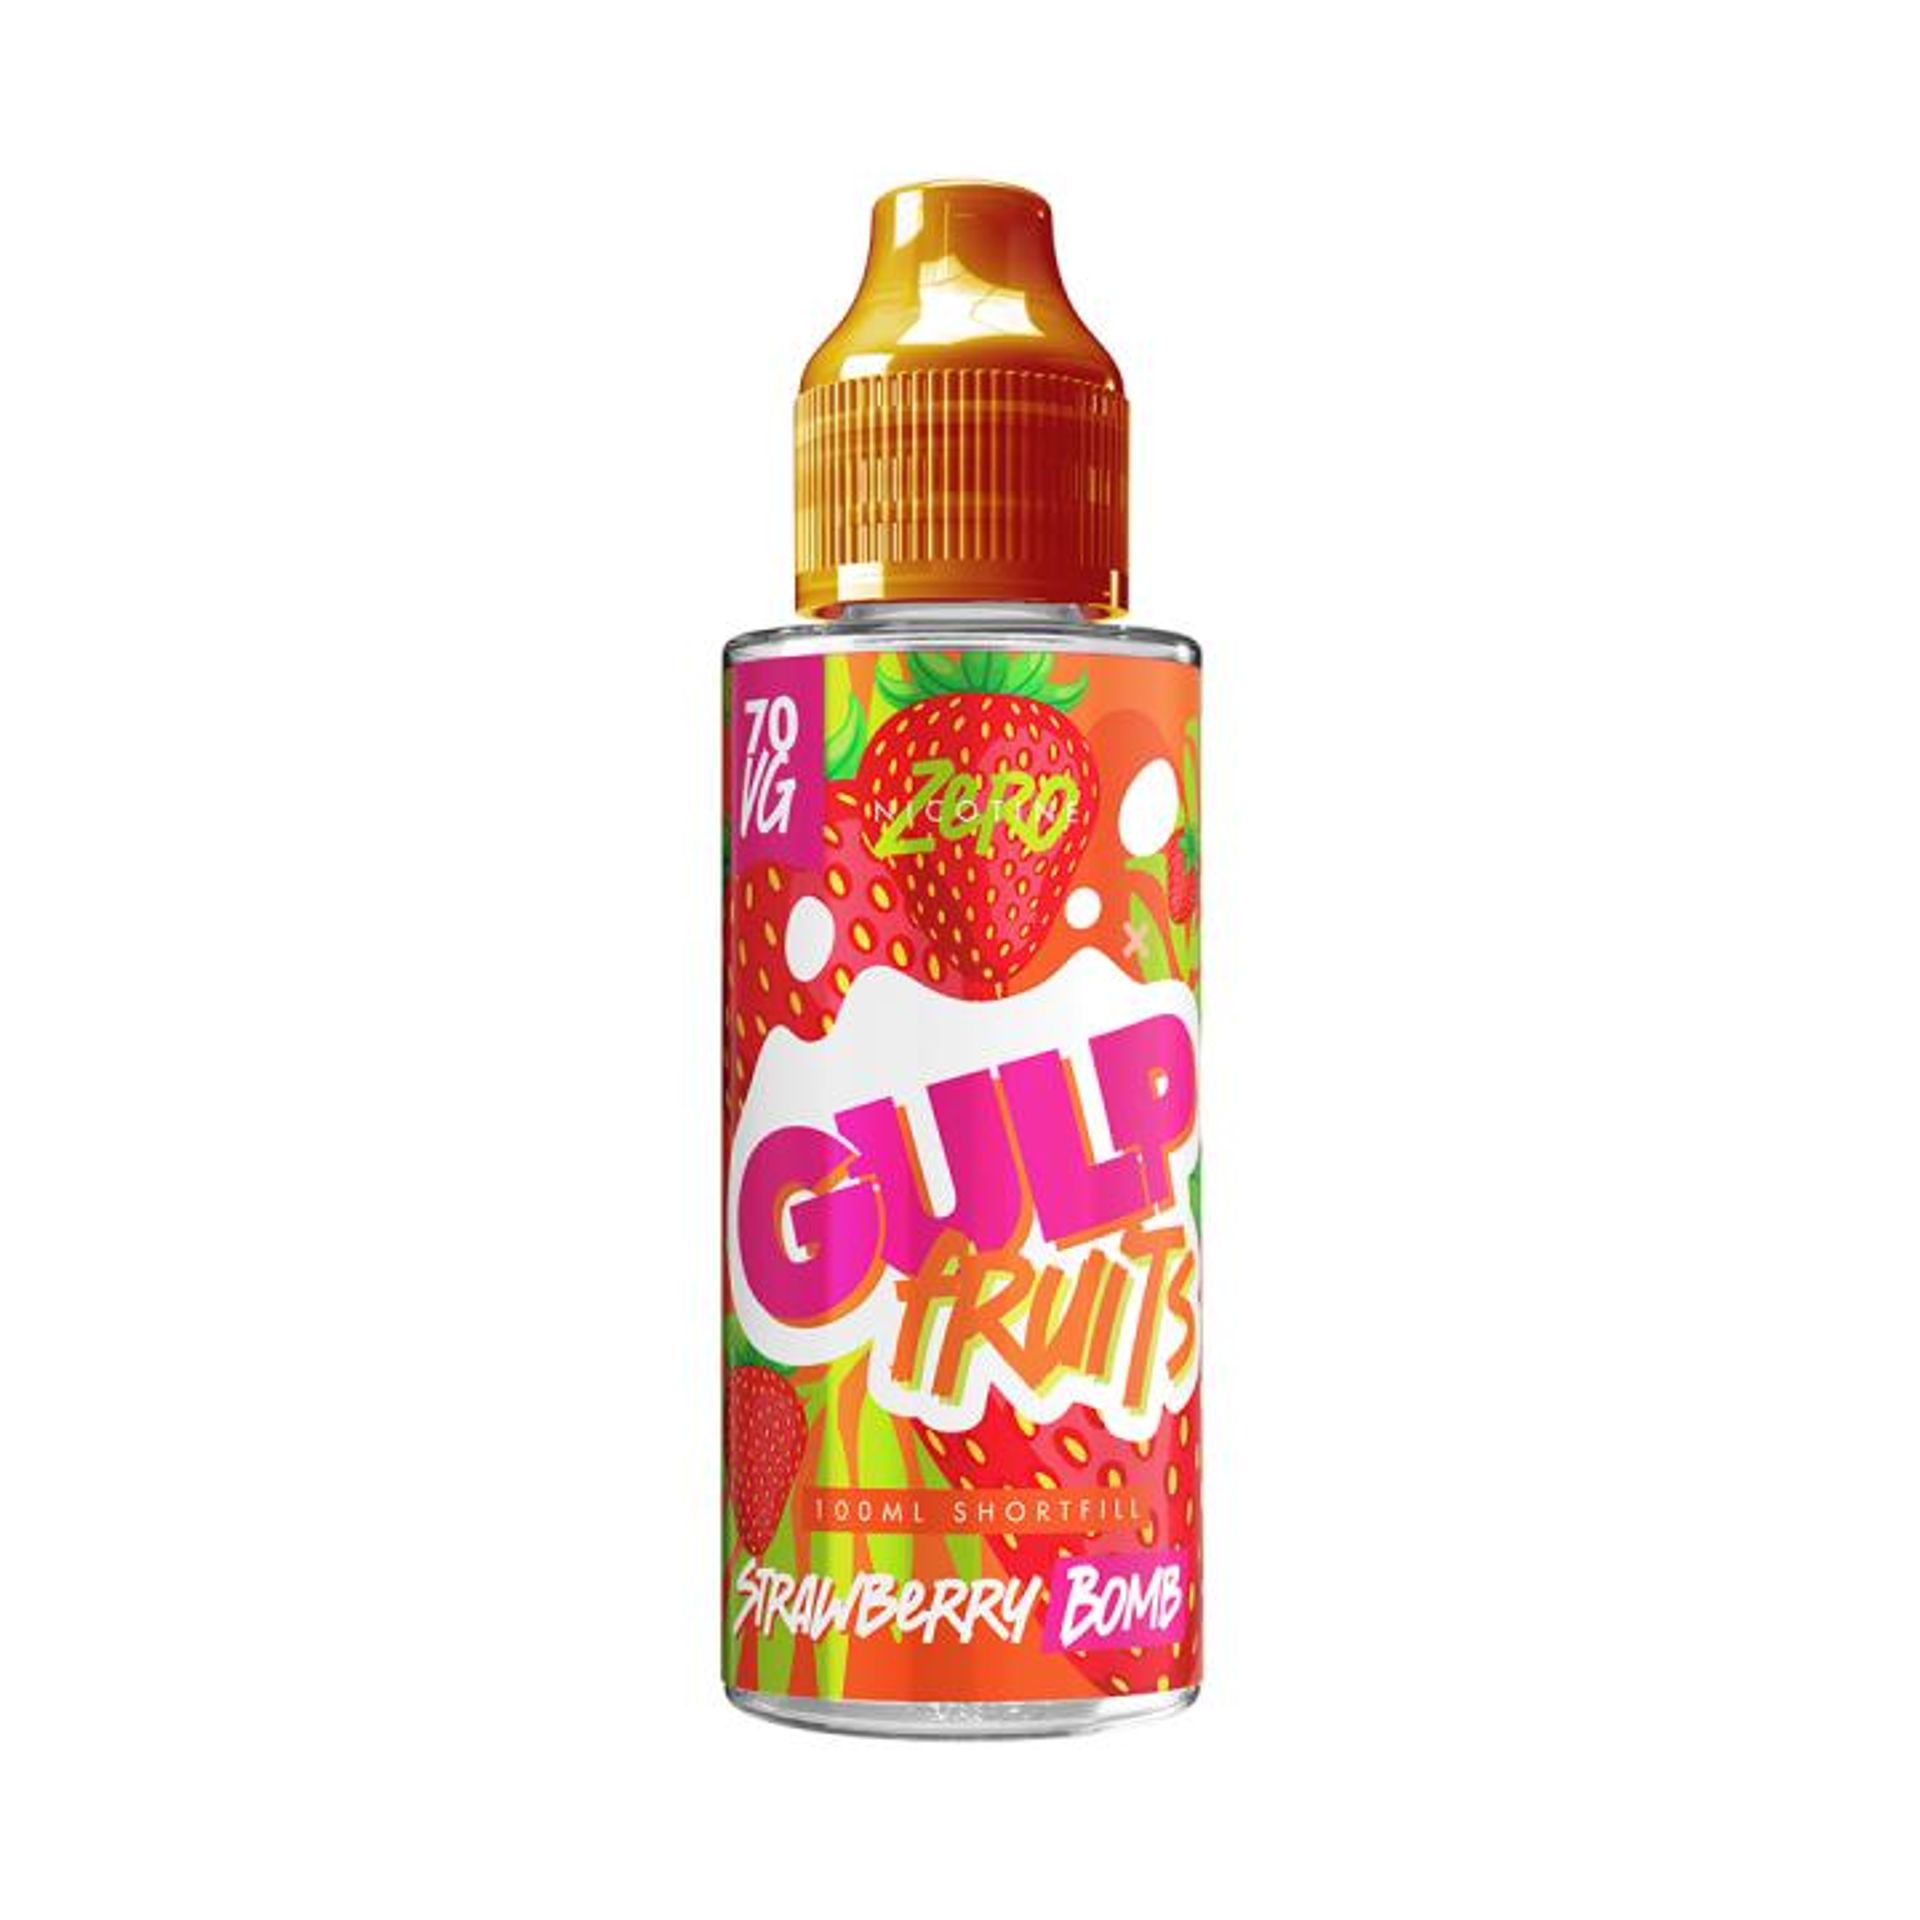 Image of Strawberry Bomb by Gulp